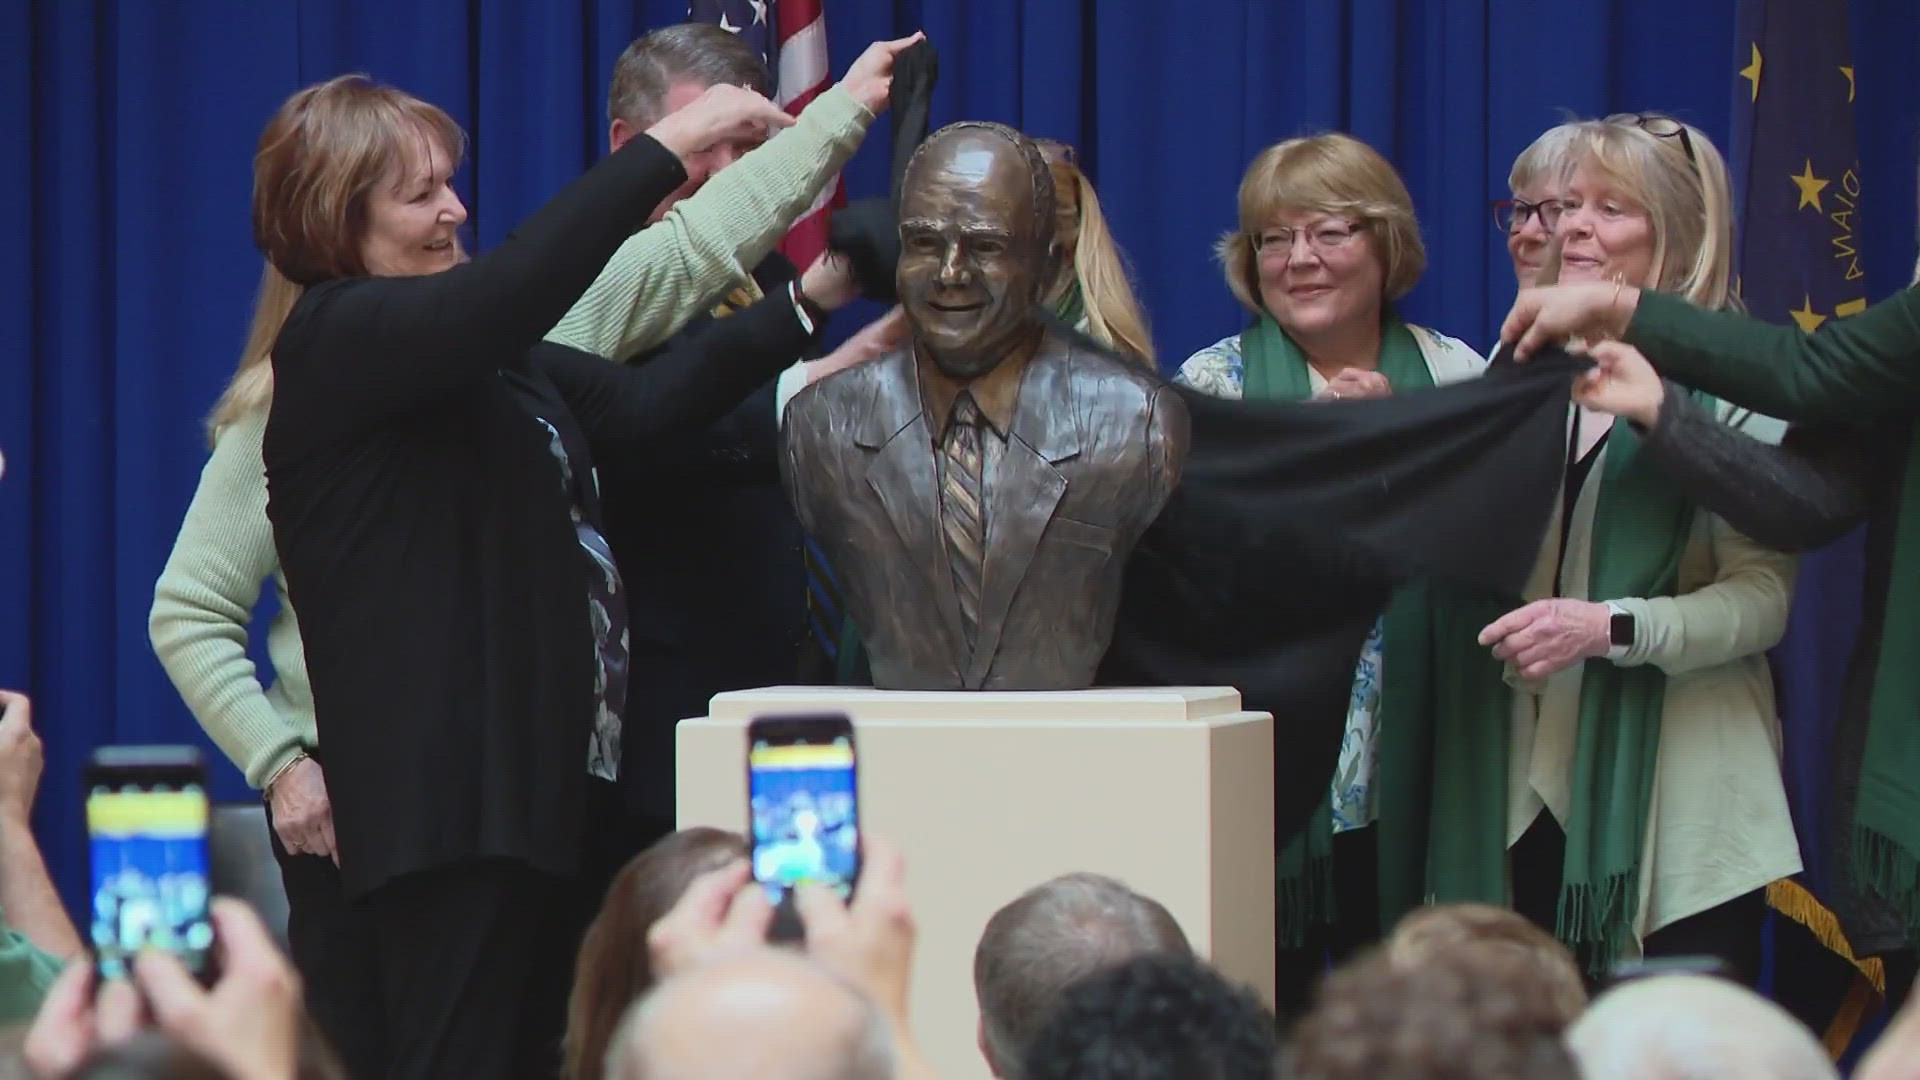 There's a bronze bust at the statehouse in honor of former Indiana Governor Joe Kernan.